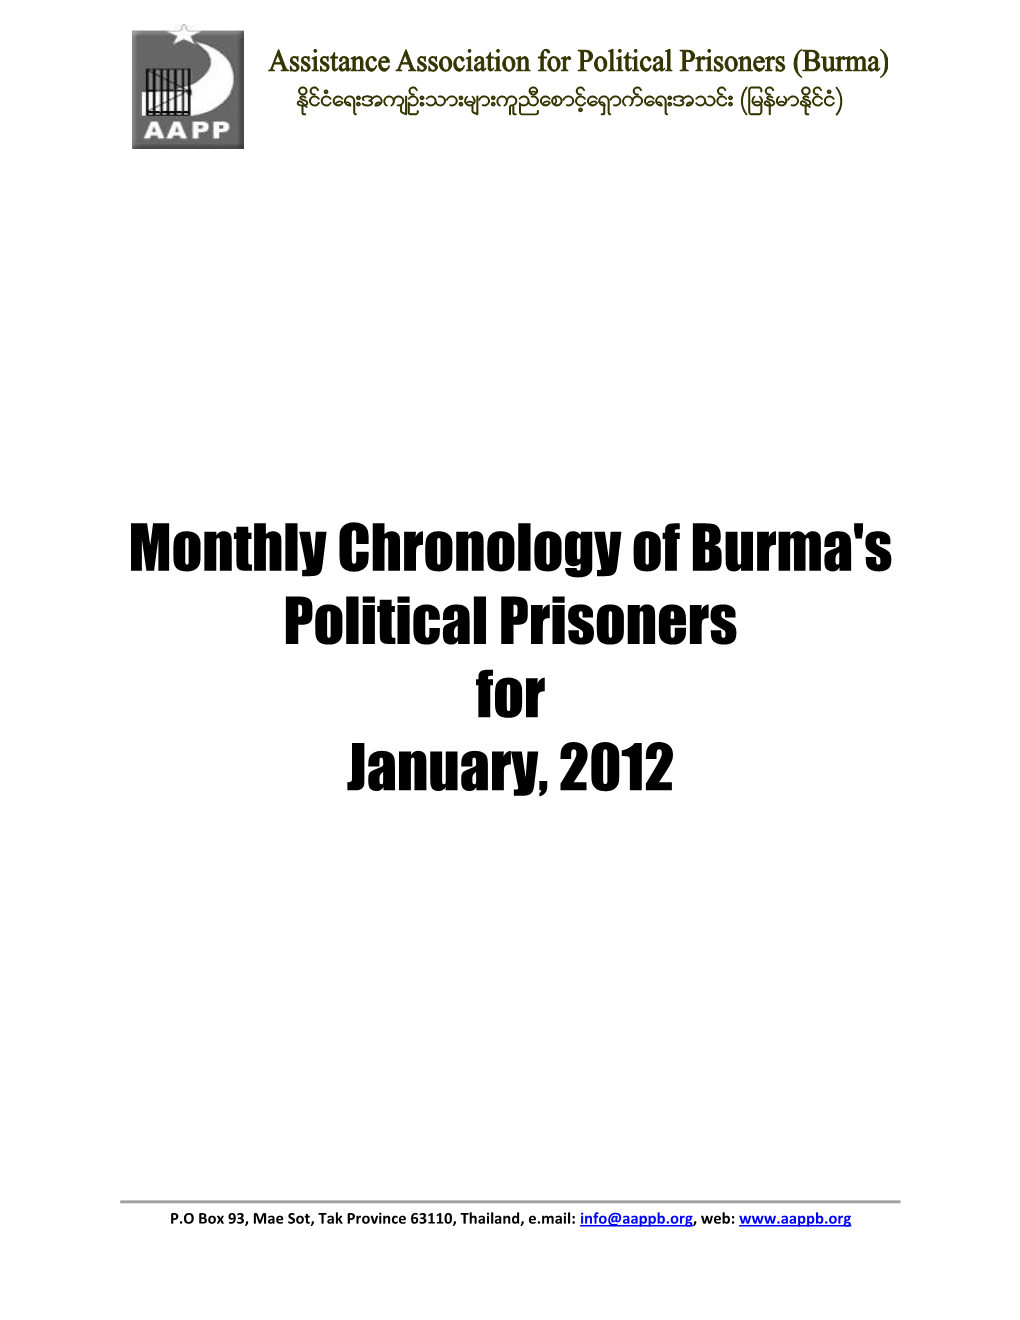 Monthly Chronology of Burma's Political Prisoners for January, 2012